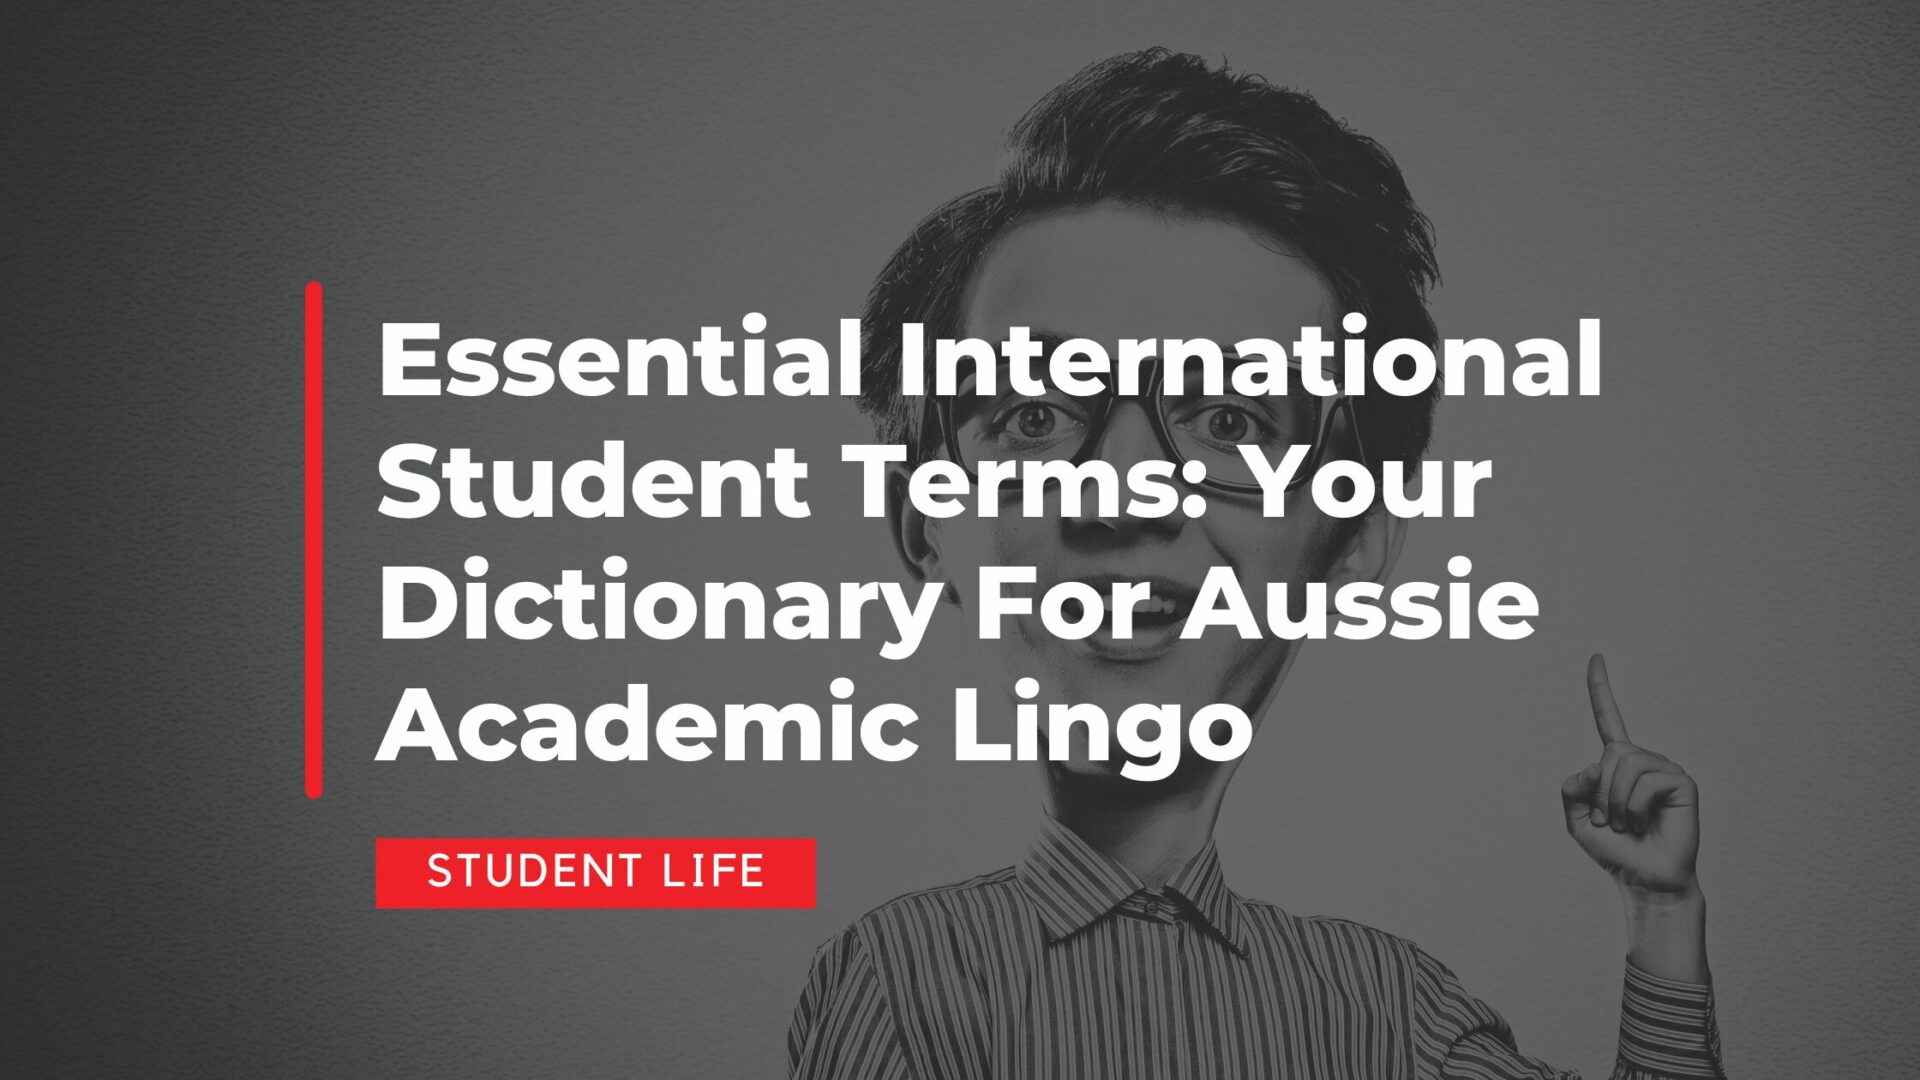 Essential International Student Terms: Your Dictionary For Aussie Academic Lingo